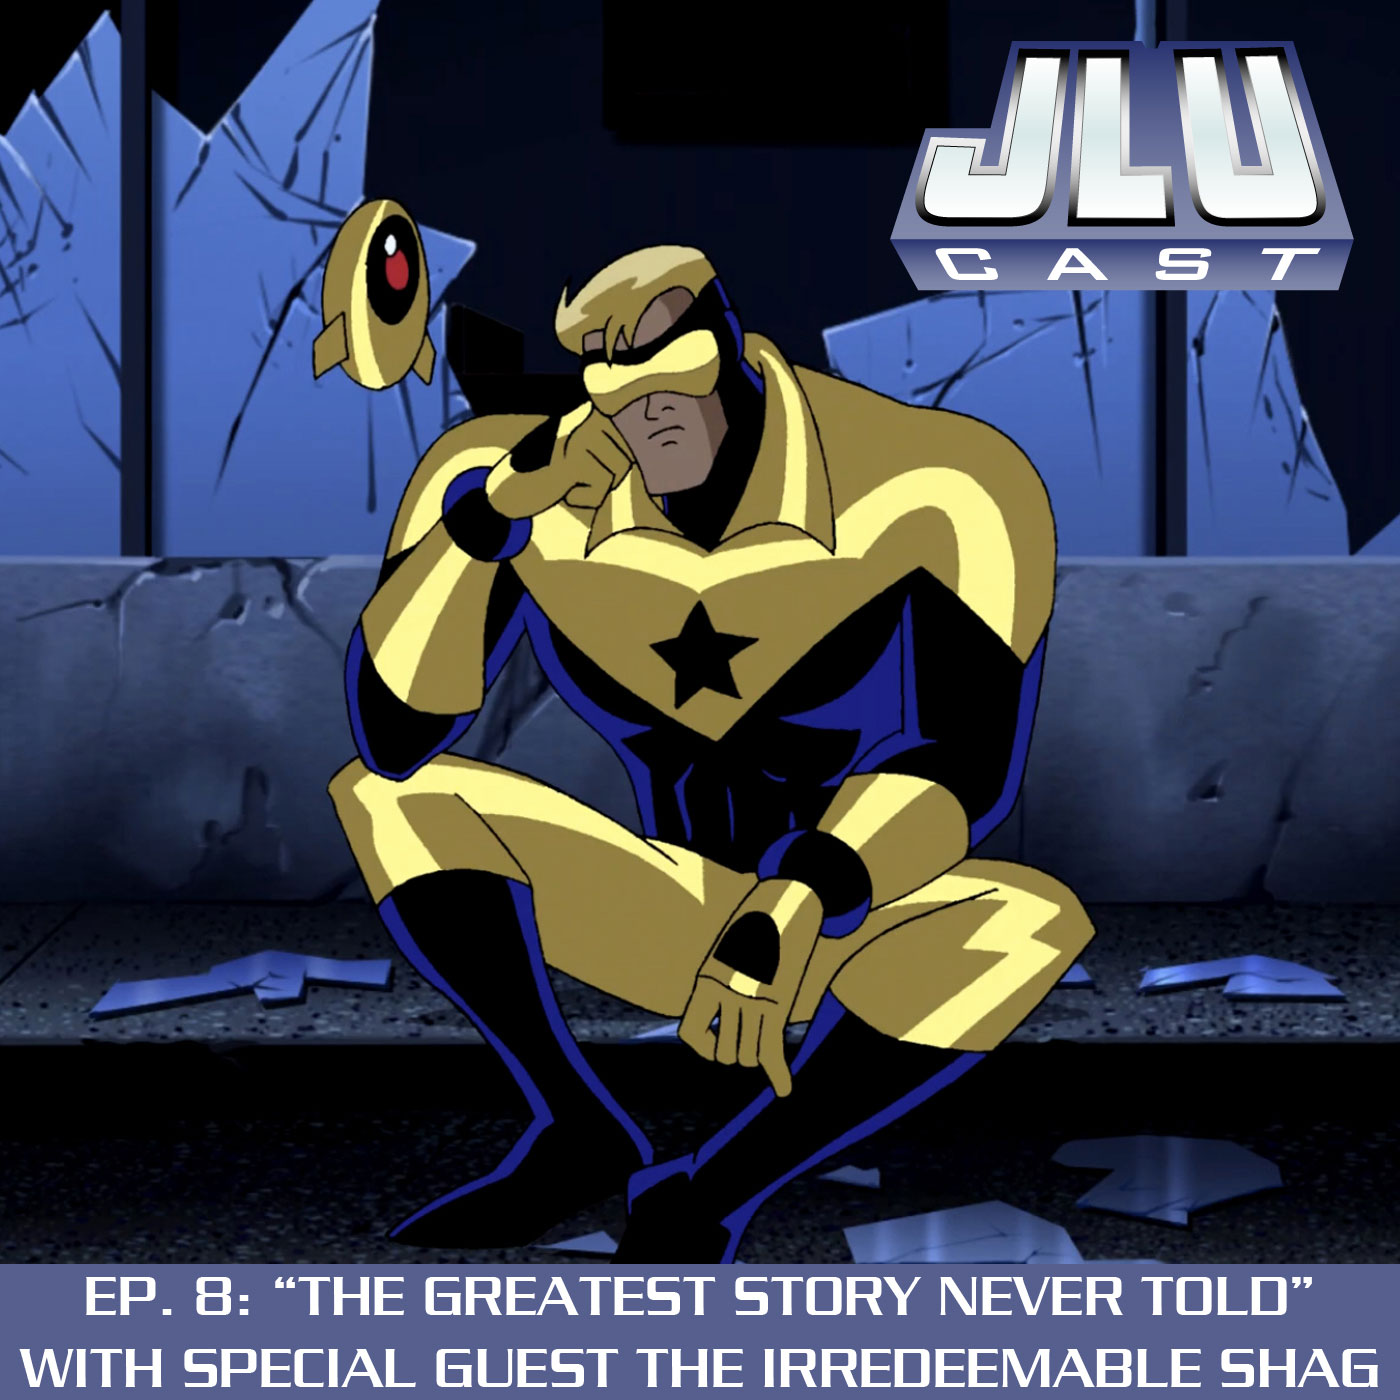 JLUCast : The Greatest Story Never Told